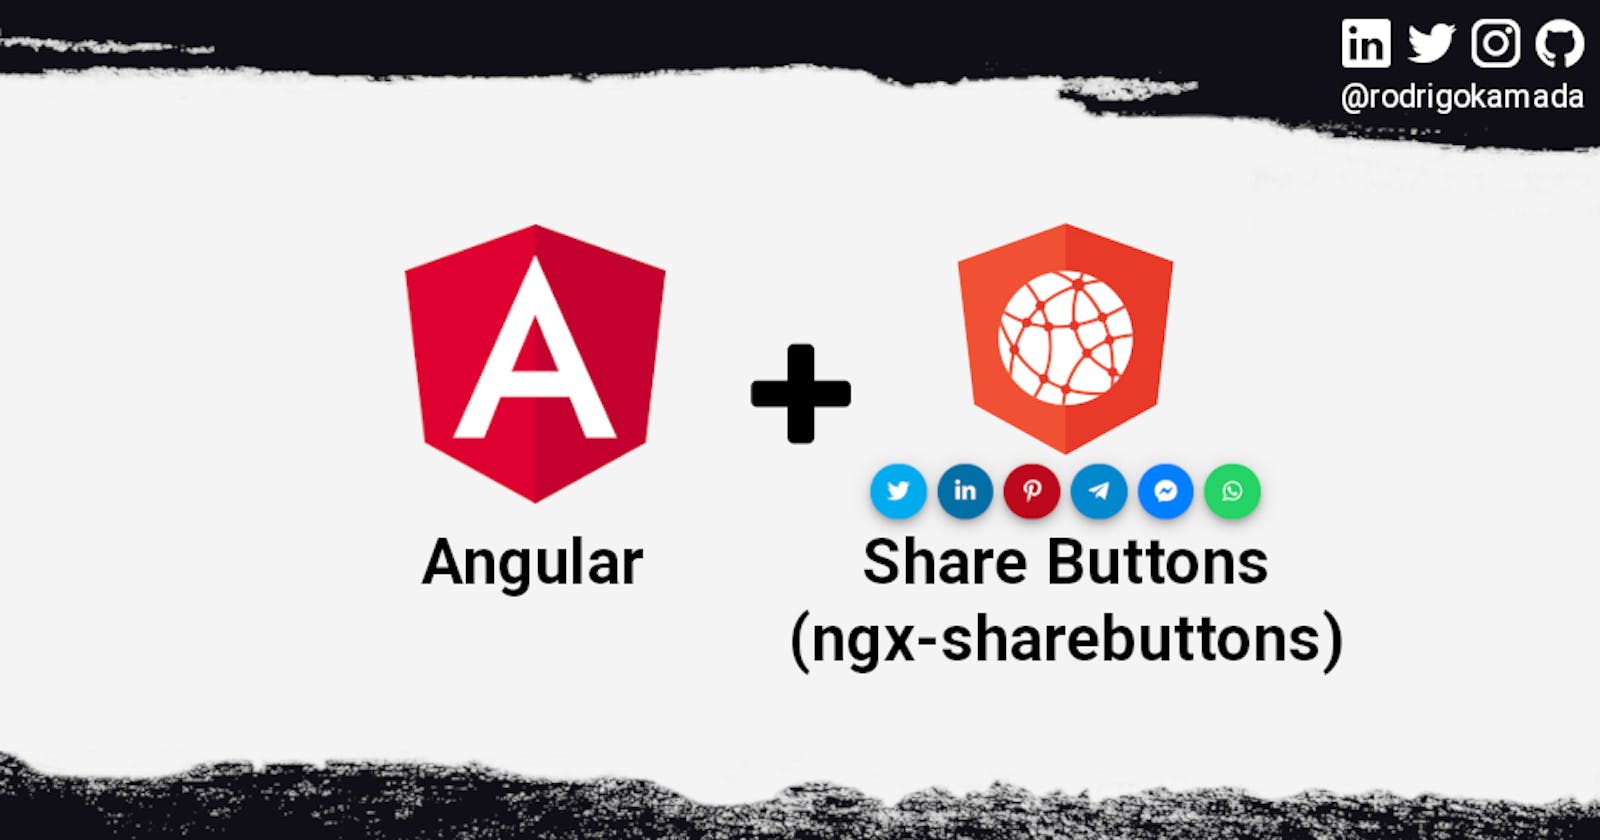 Adding the social media share buttons component to an Angular application